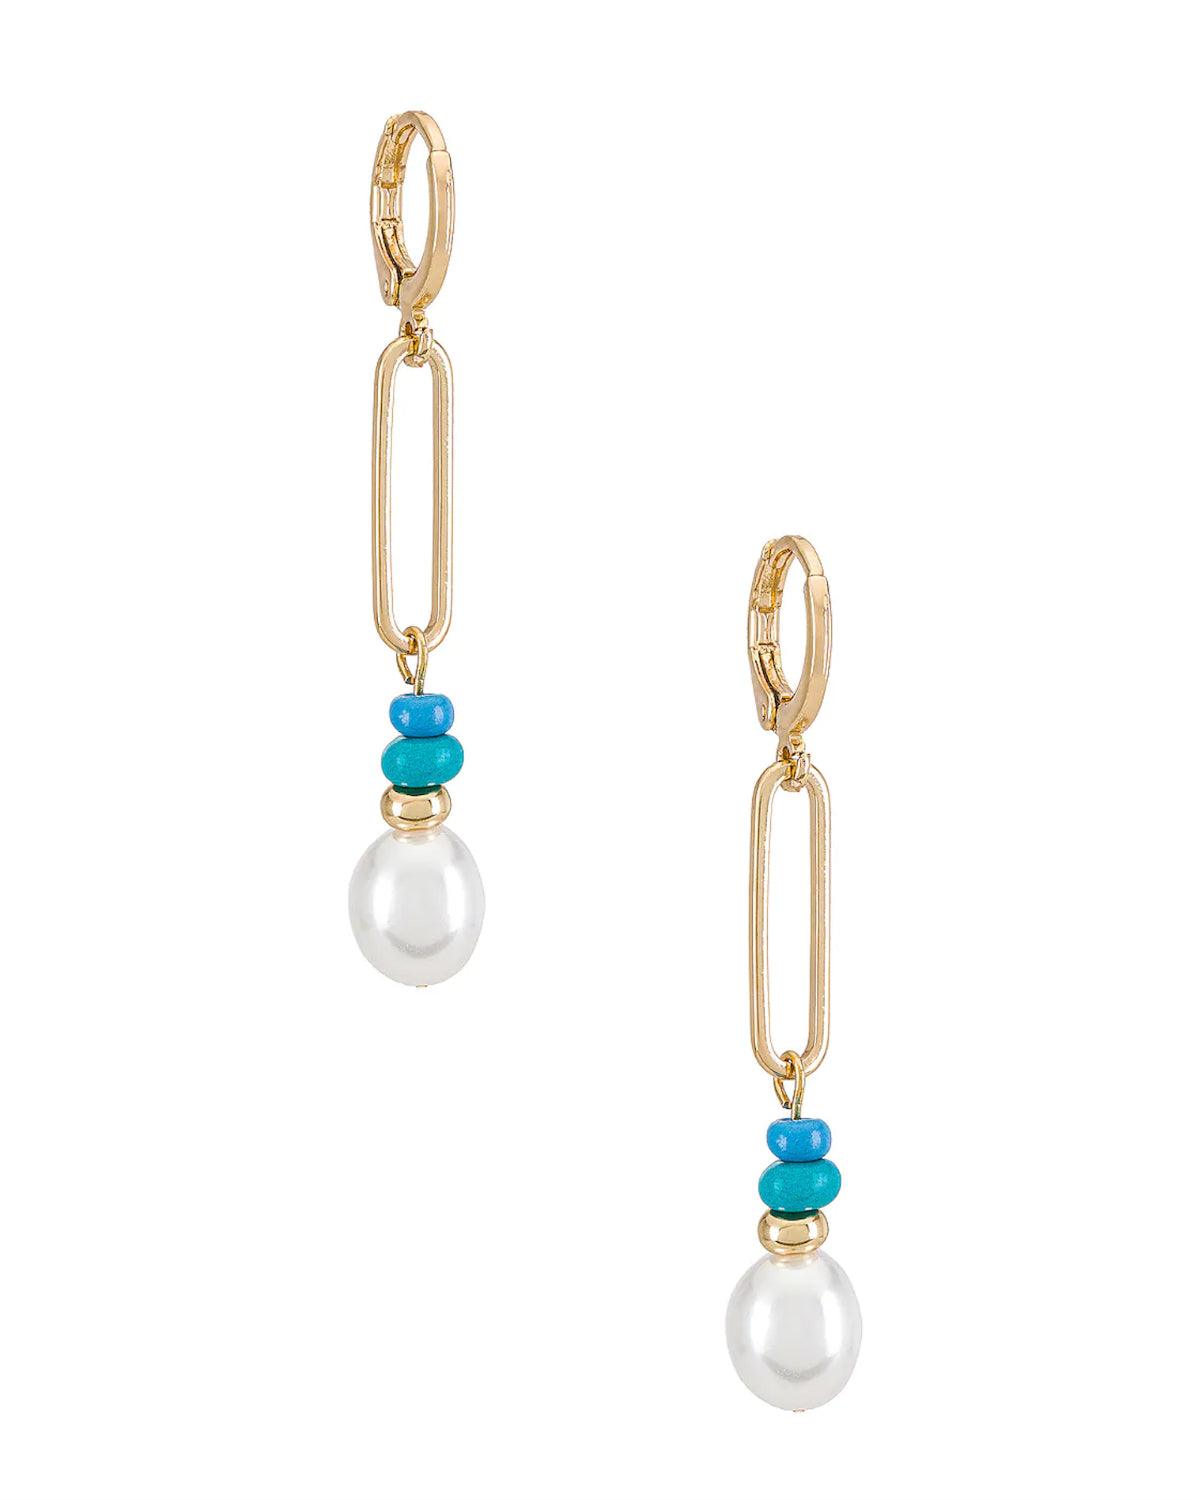 CHAIN, PEARL & BEAD DROP EARRING - 8 Other Reasons